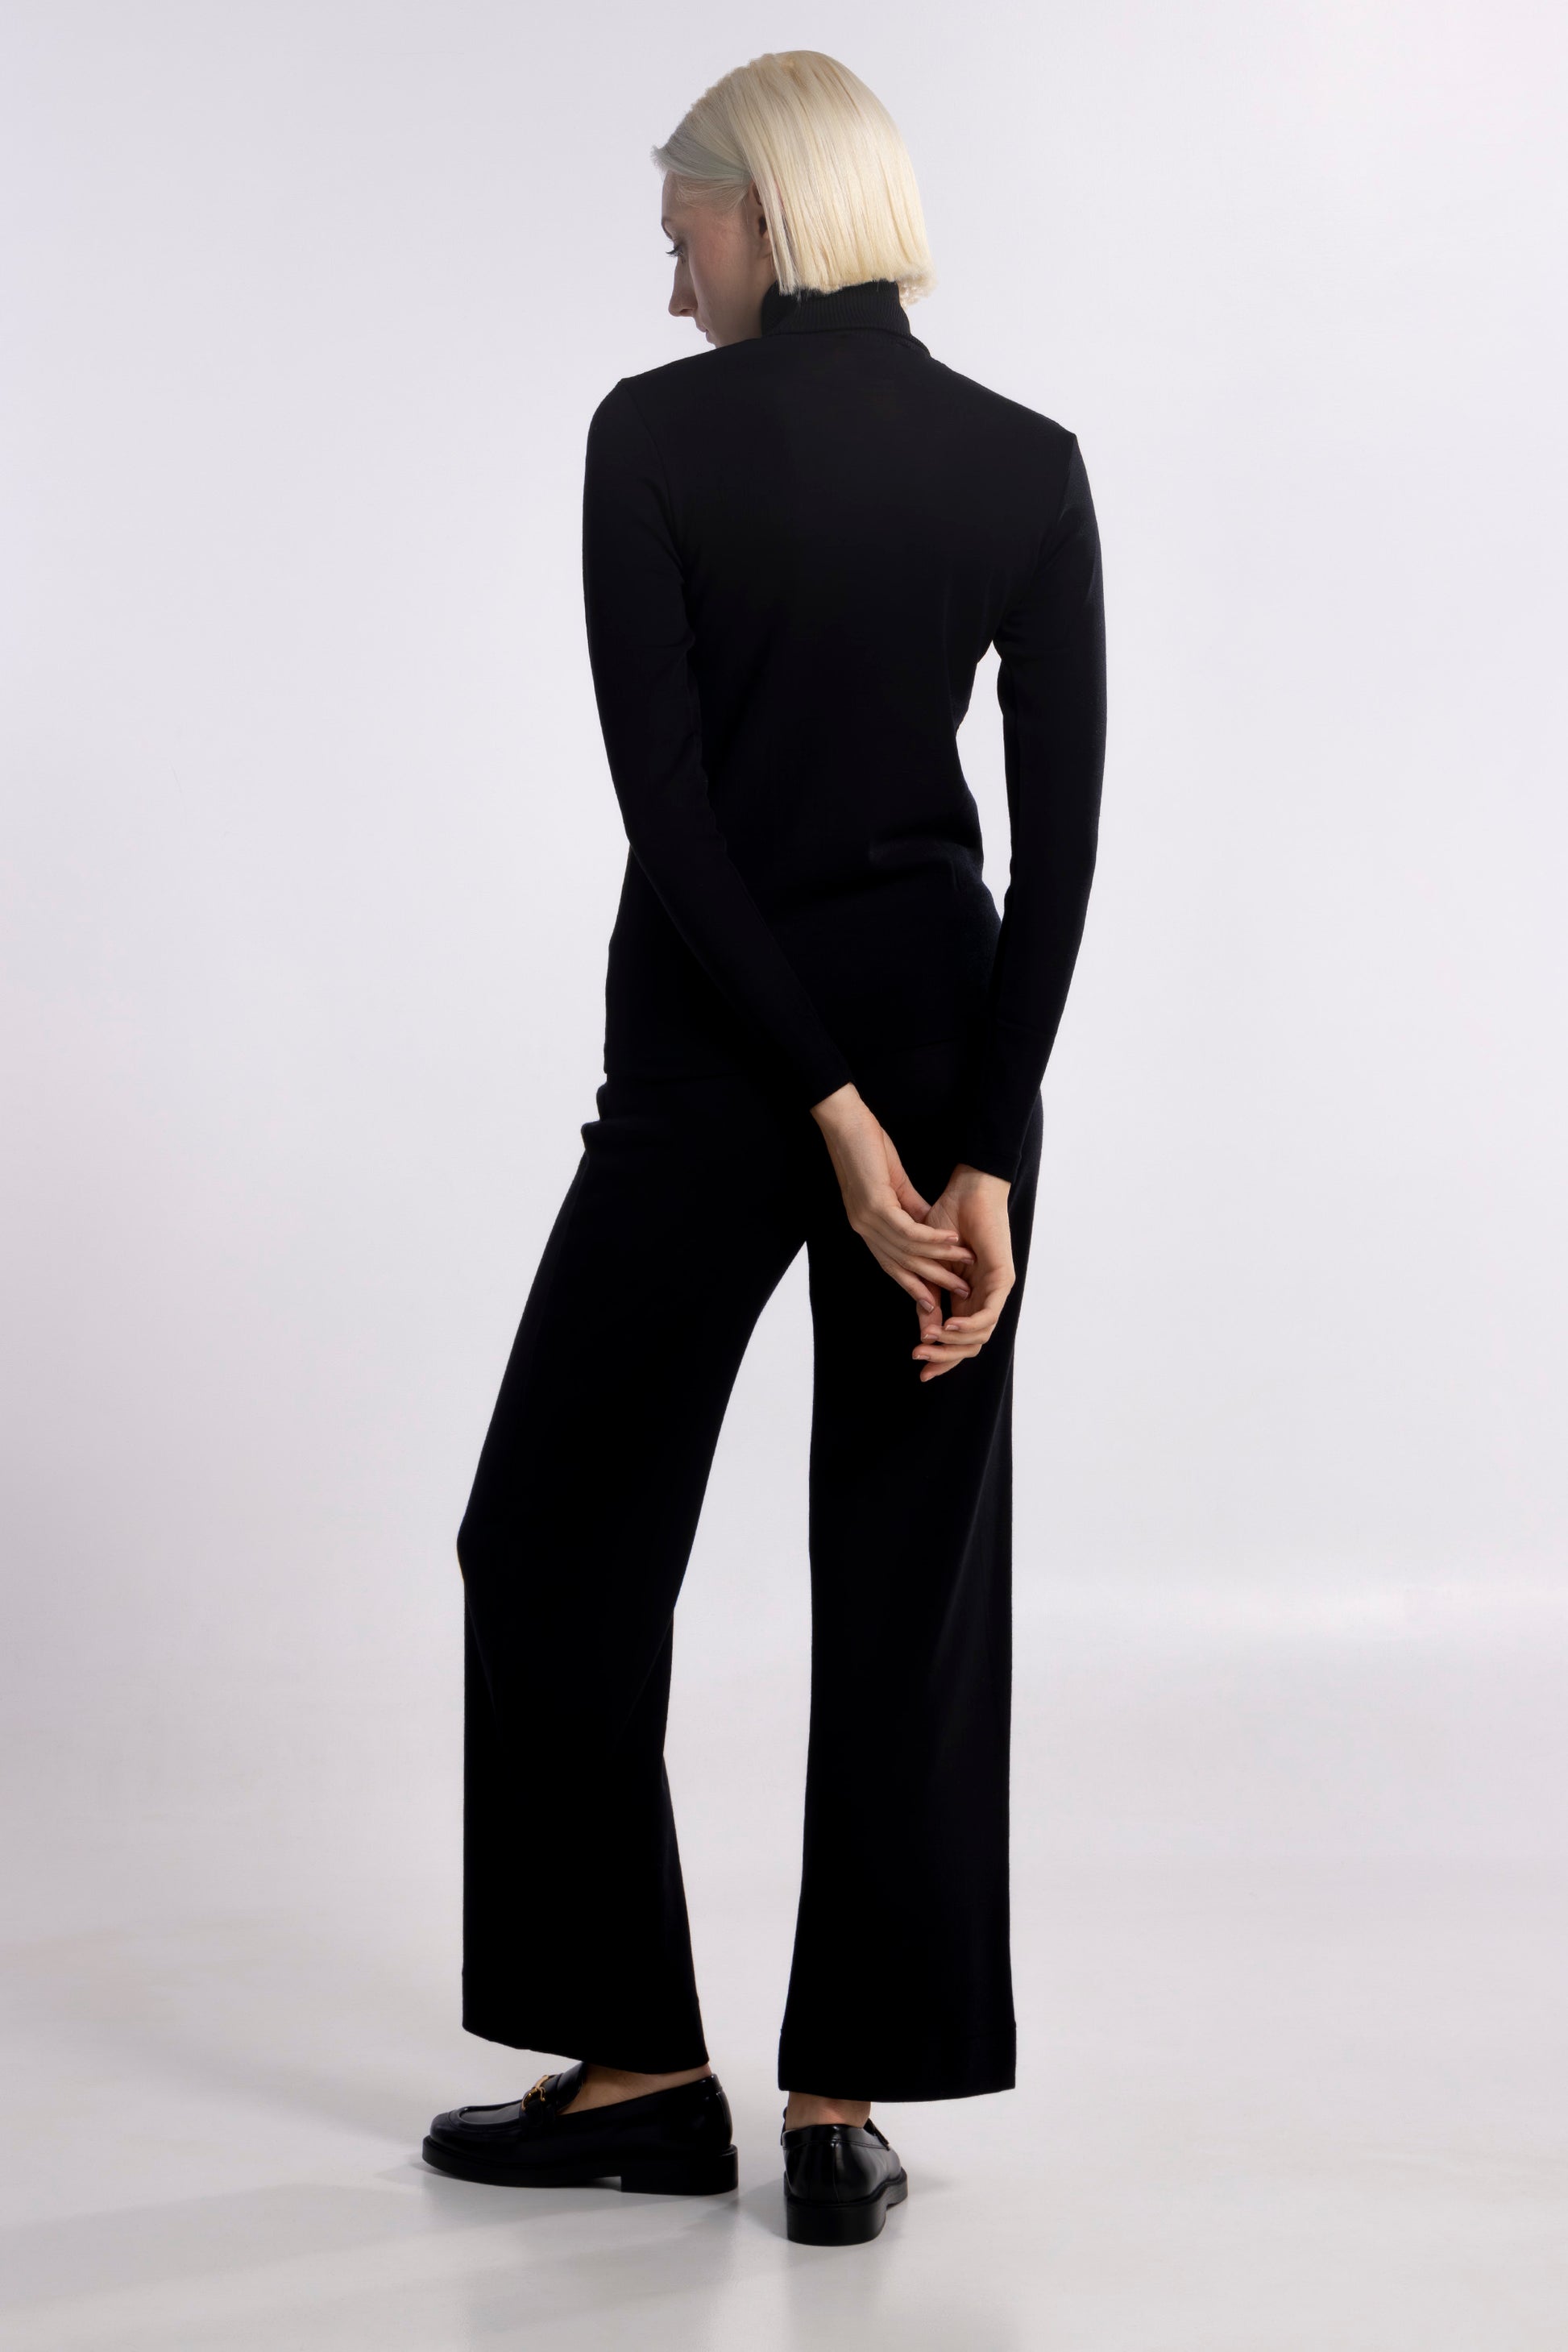 Long-Sleeved Turtleneck shirt in Wool and Silk flat fabric 3478 - Oscalito